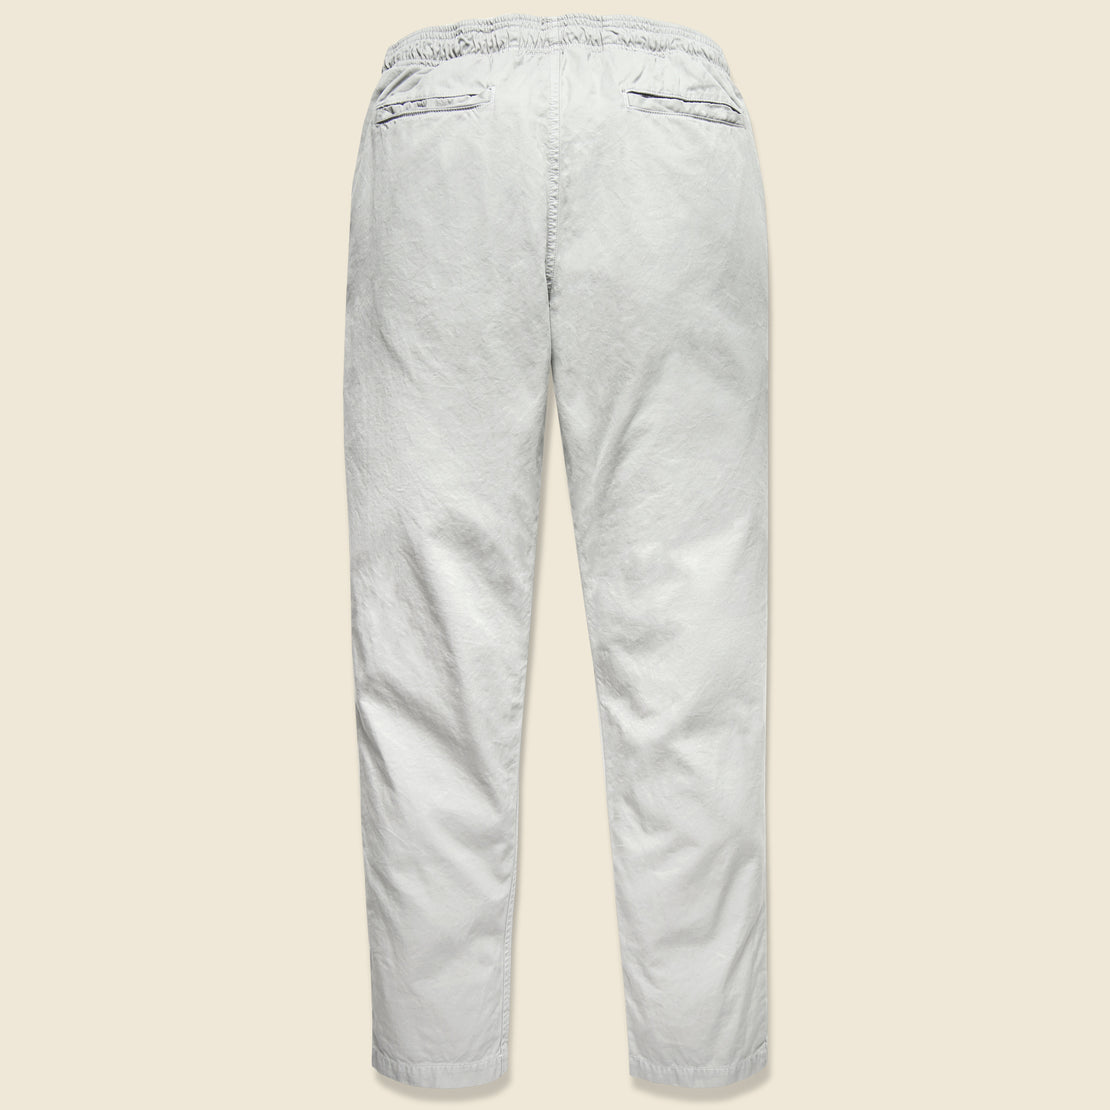 Twill Easy Chino - Cement - Save Khaki - STAG Provisions - Pants - Twill